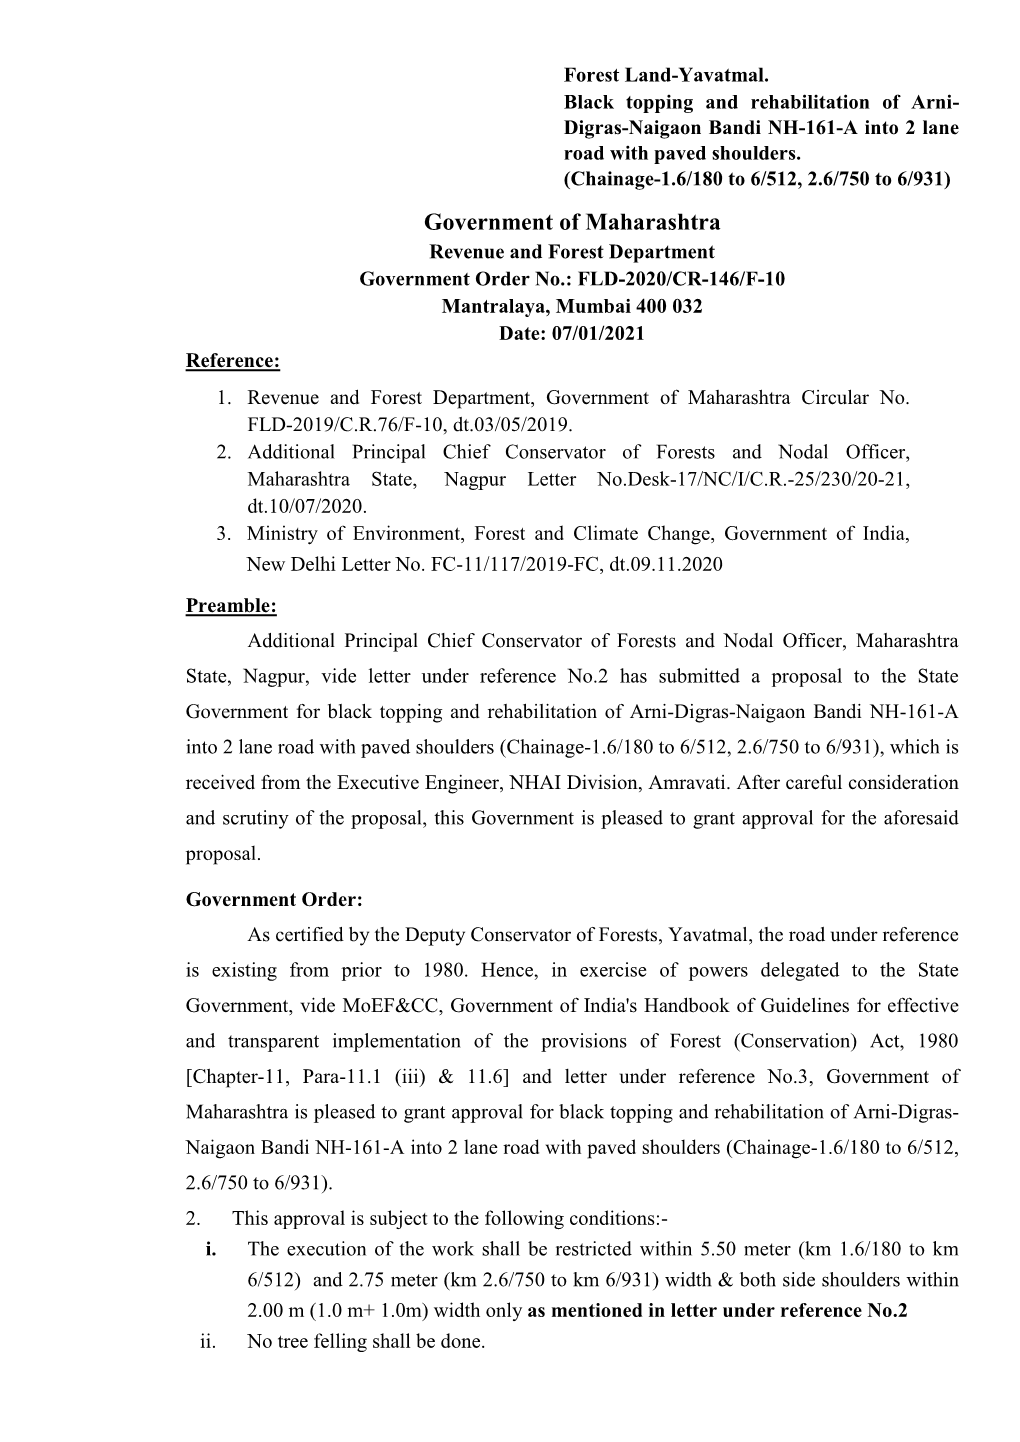 Government of Maharashtra Revenue and Forest Department Government Order No.: FLD-2020/CR-146/F-10 Mantralaya, Mumbai 400 032 Date: 07/01/2021 Reference: 1